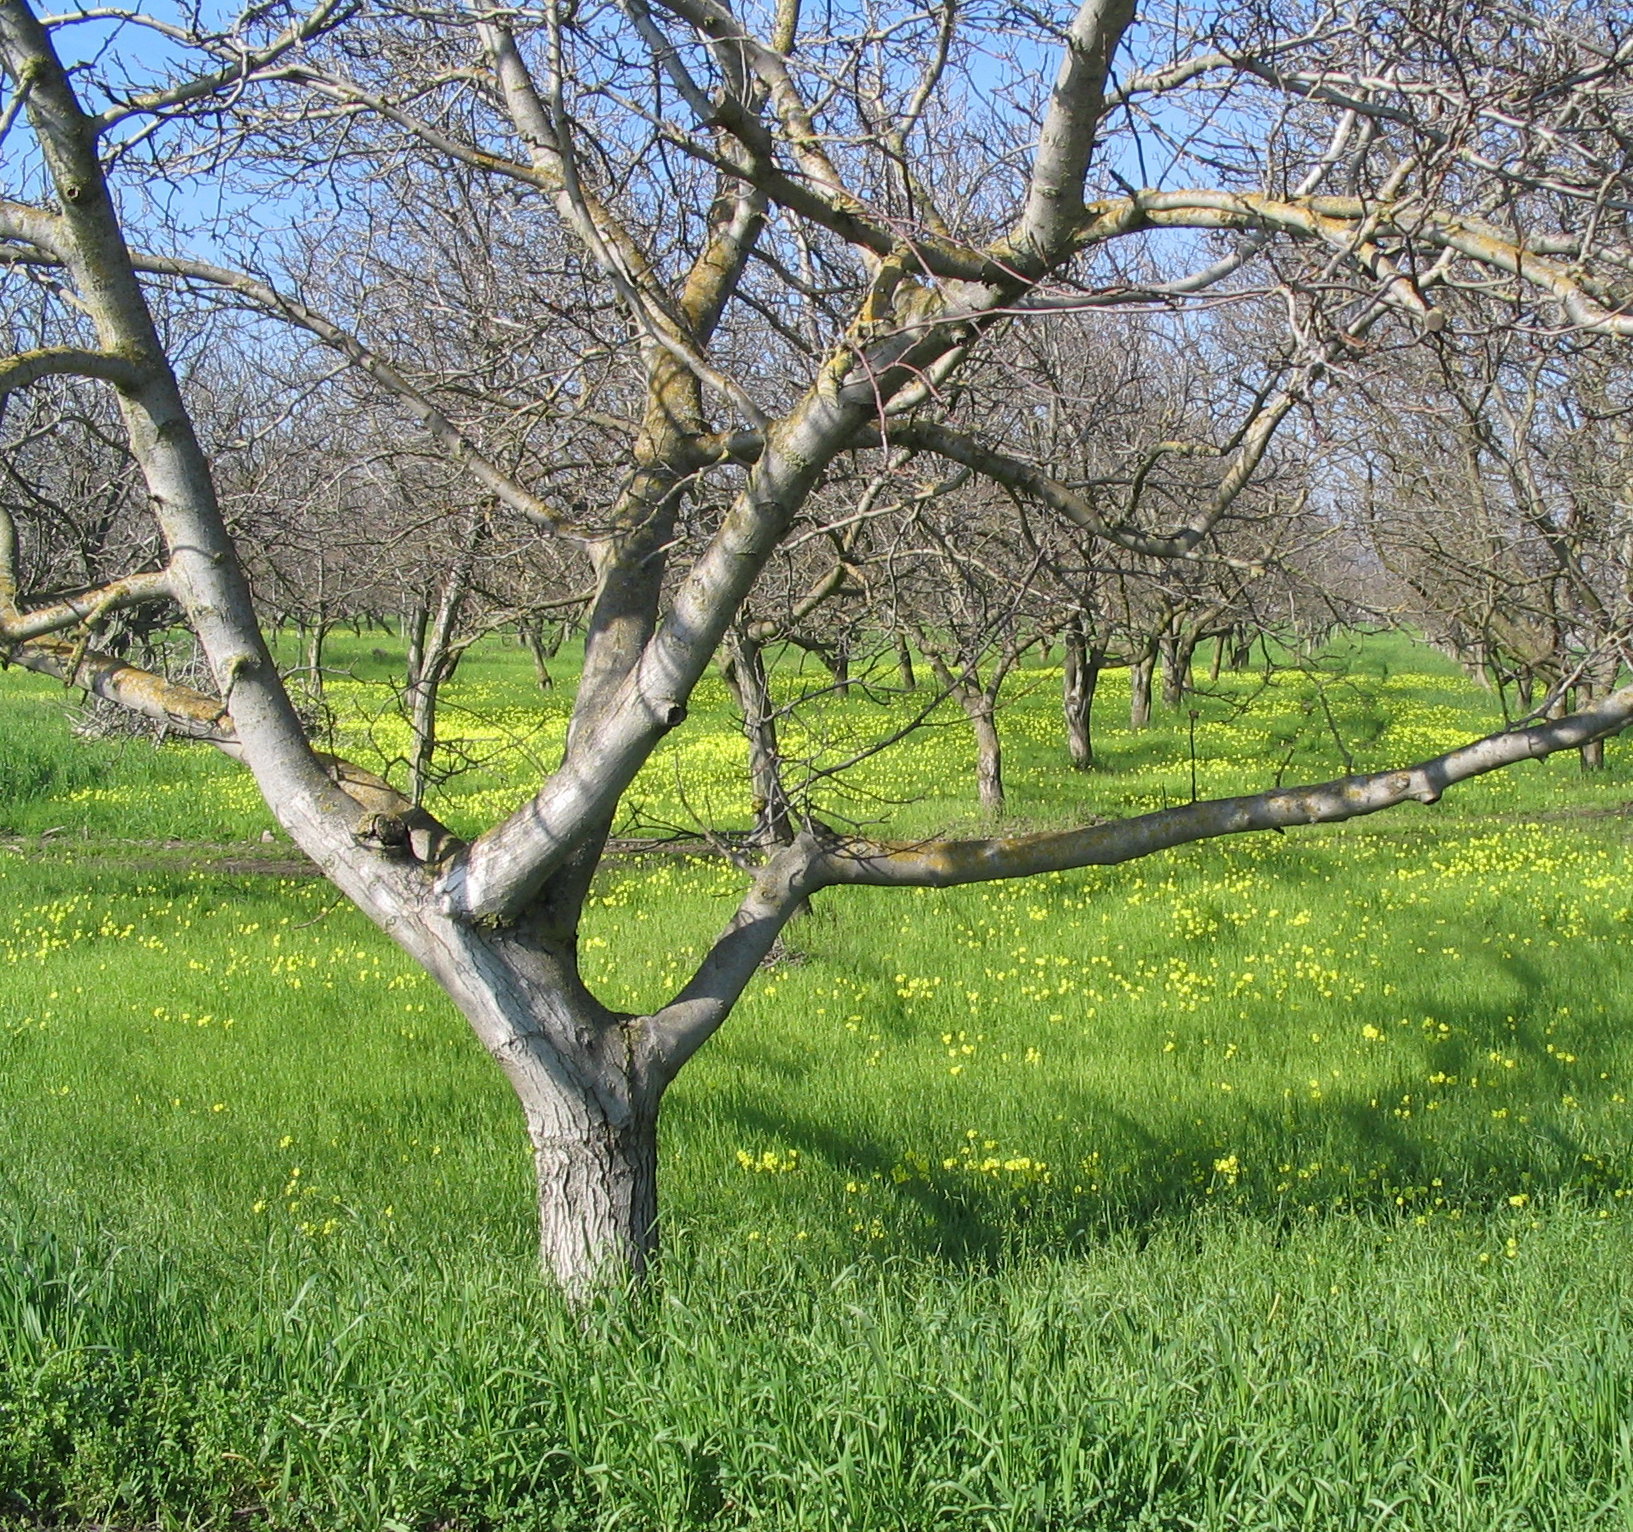 Dormant fruit trees in orchard with mustard groundcover blooming